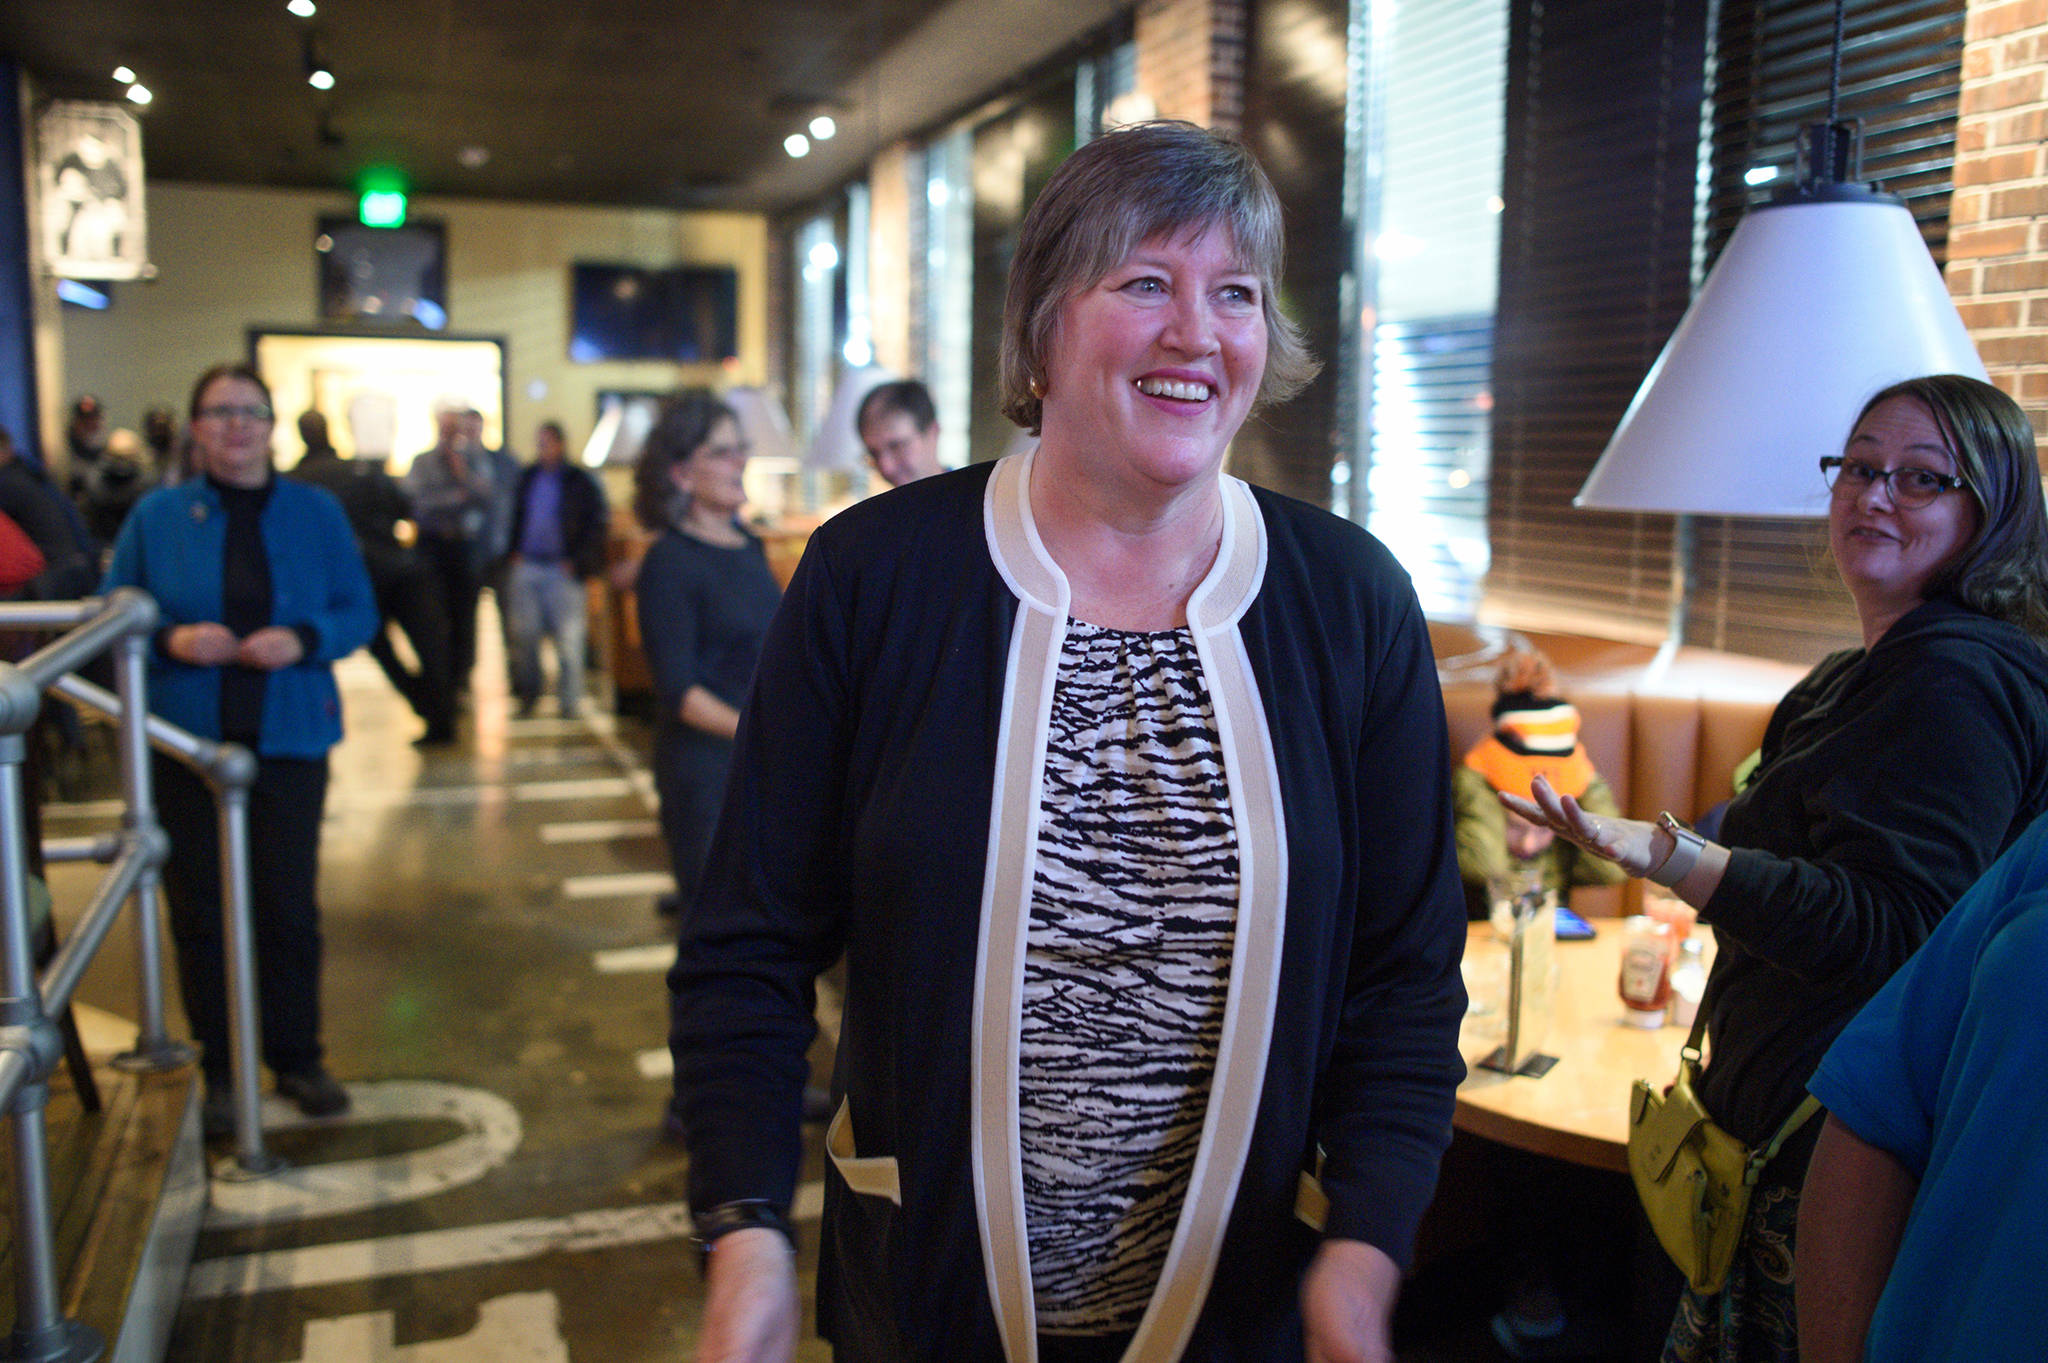 Sara Hannan, Democratic candidate for House Distric 33, walks into McGiveny’s Sports Bar and Grill on election night. Hannan won her race over independent candidate Chris Dimond. (Michael Penn | Juneau Empire)